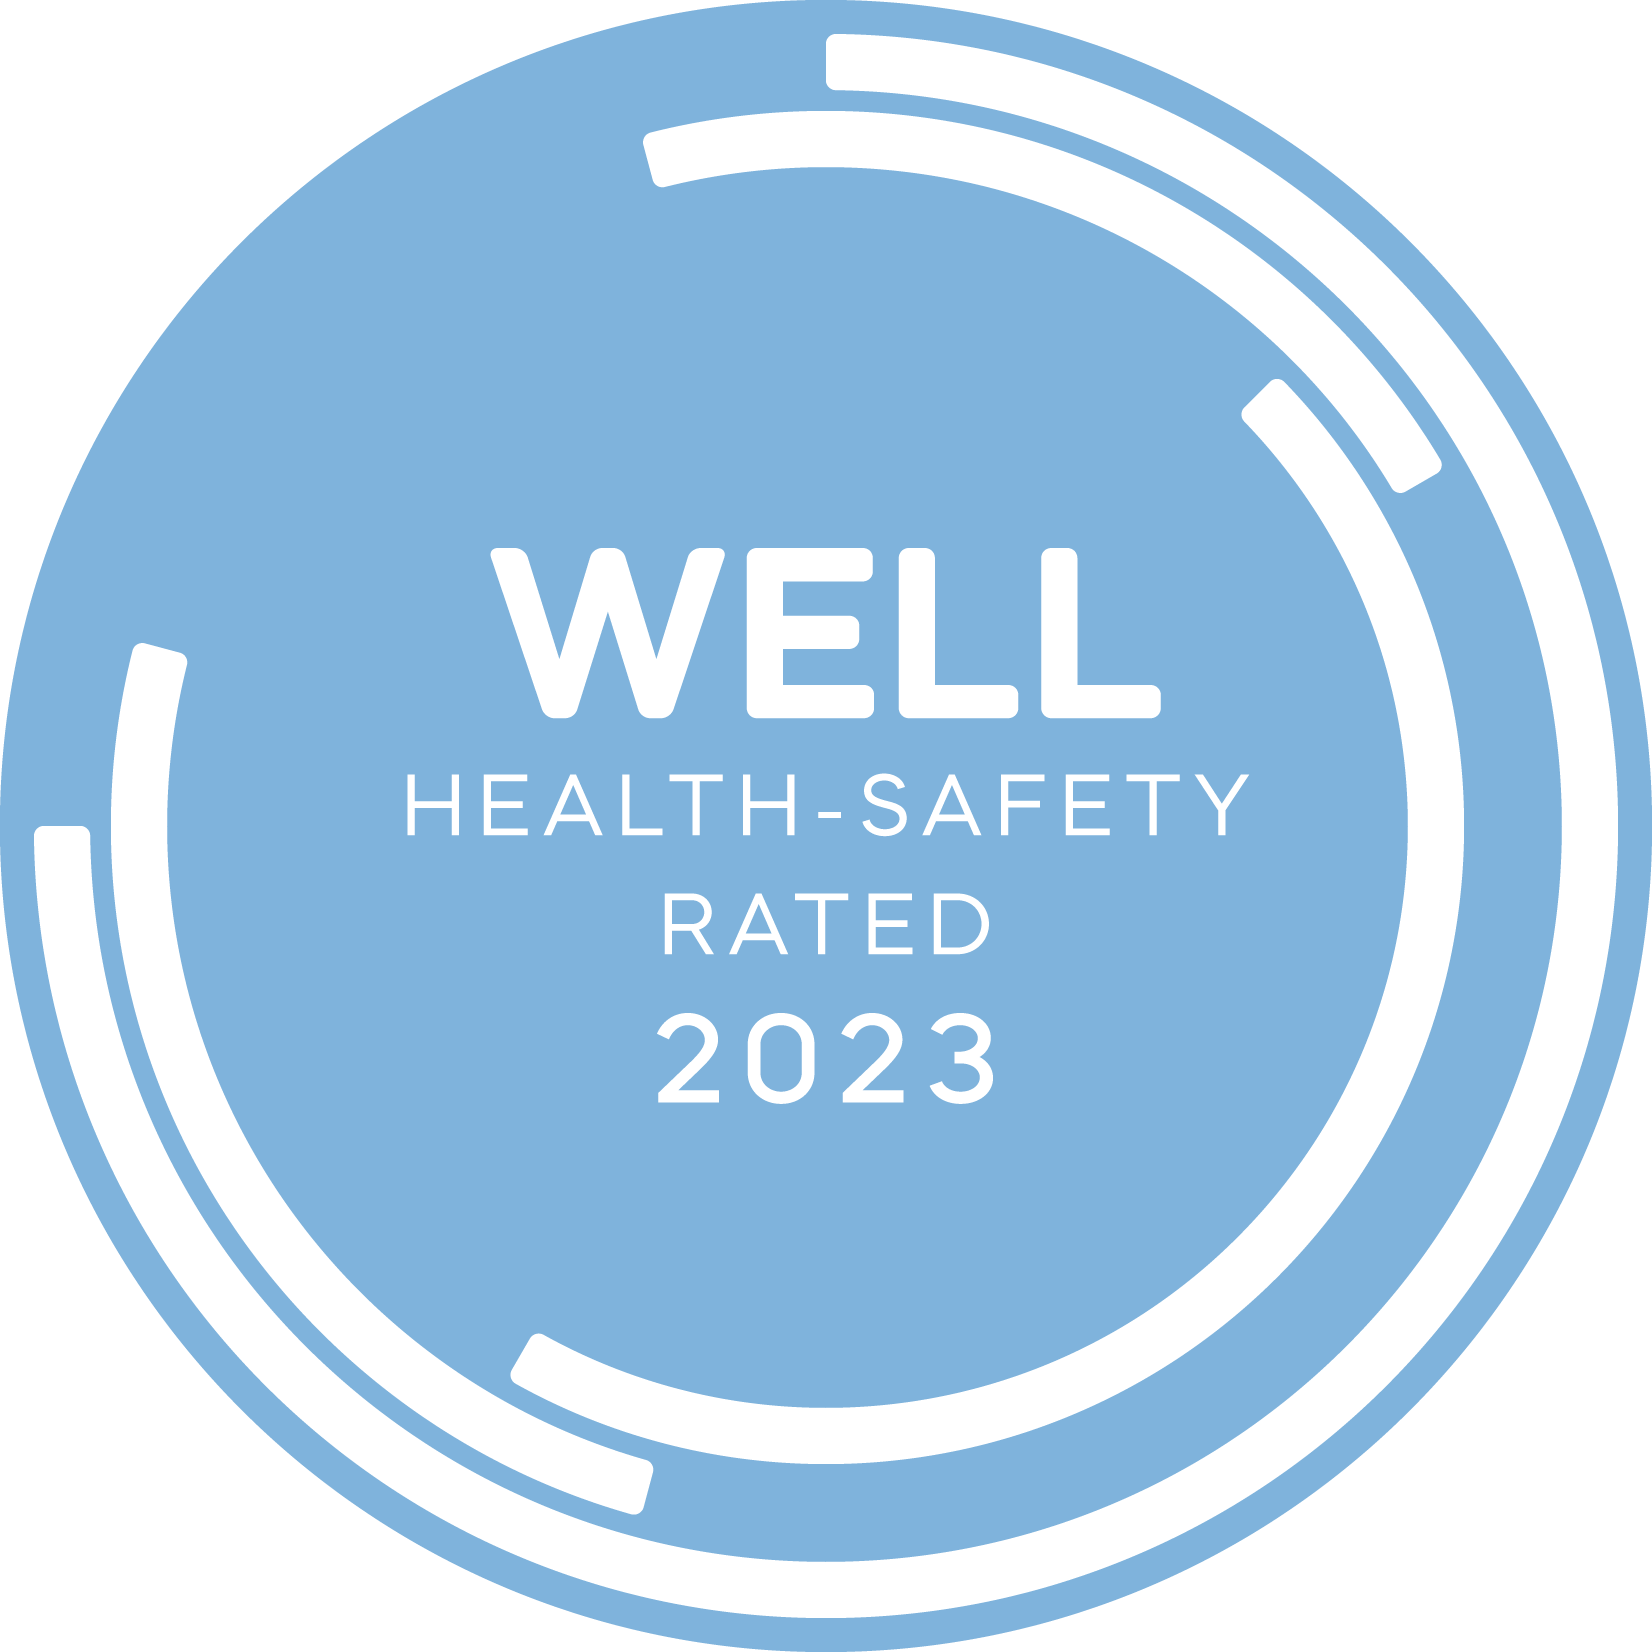 2023: WELL Health-Safety Rated